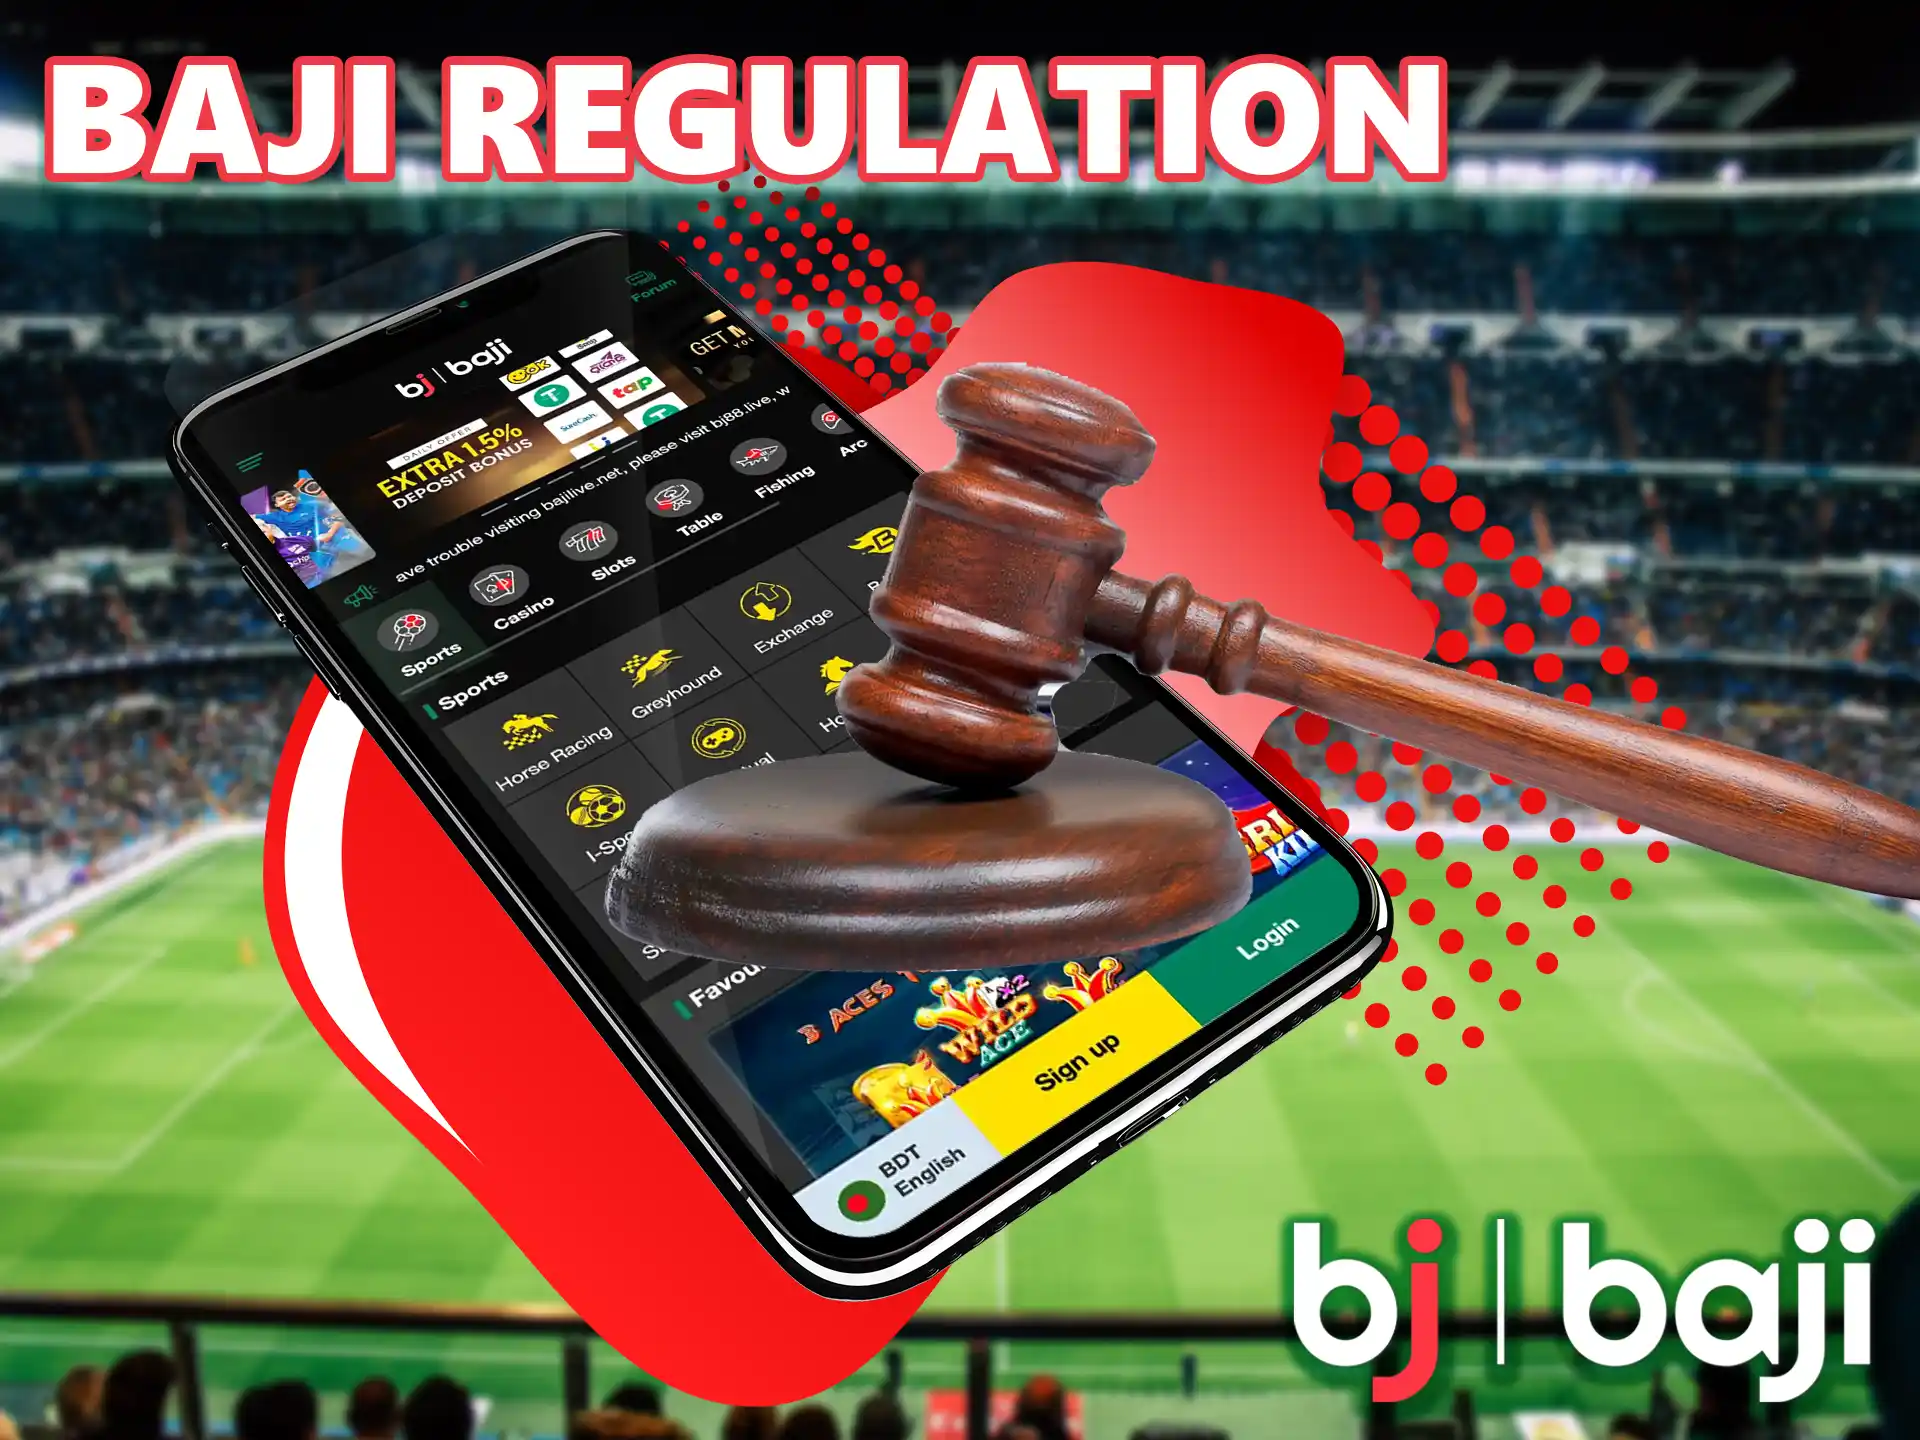 Baji is a world renowned bookmaker operating legally, licensed by the Curacao E-Gaming Commission.